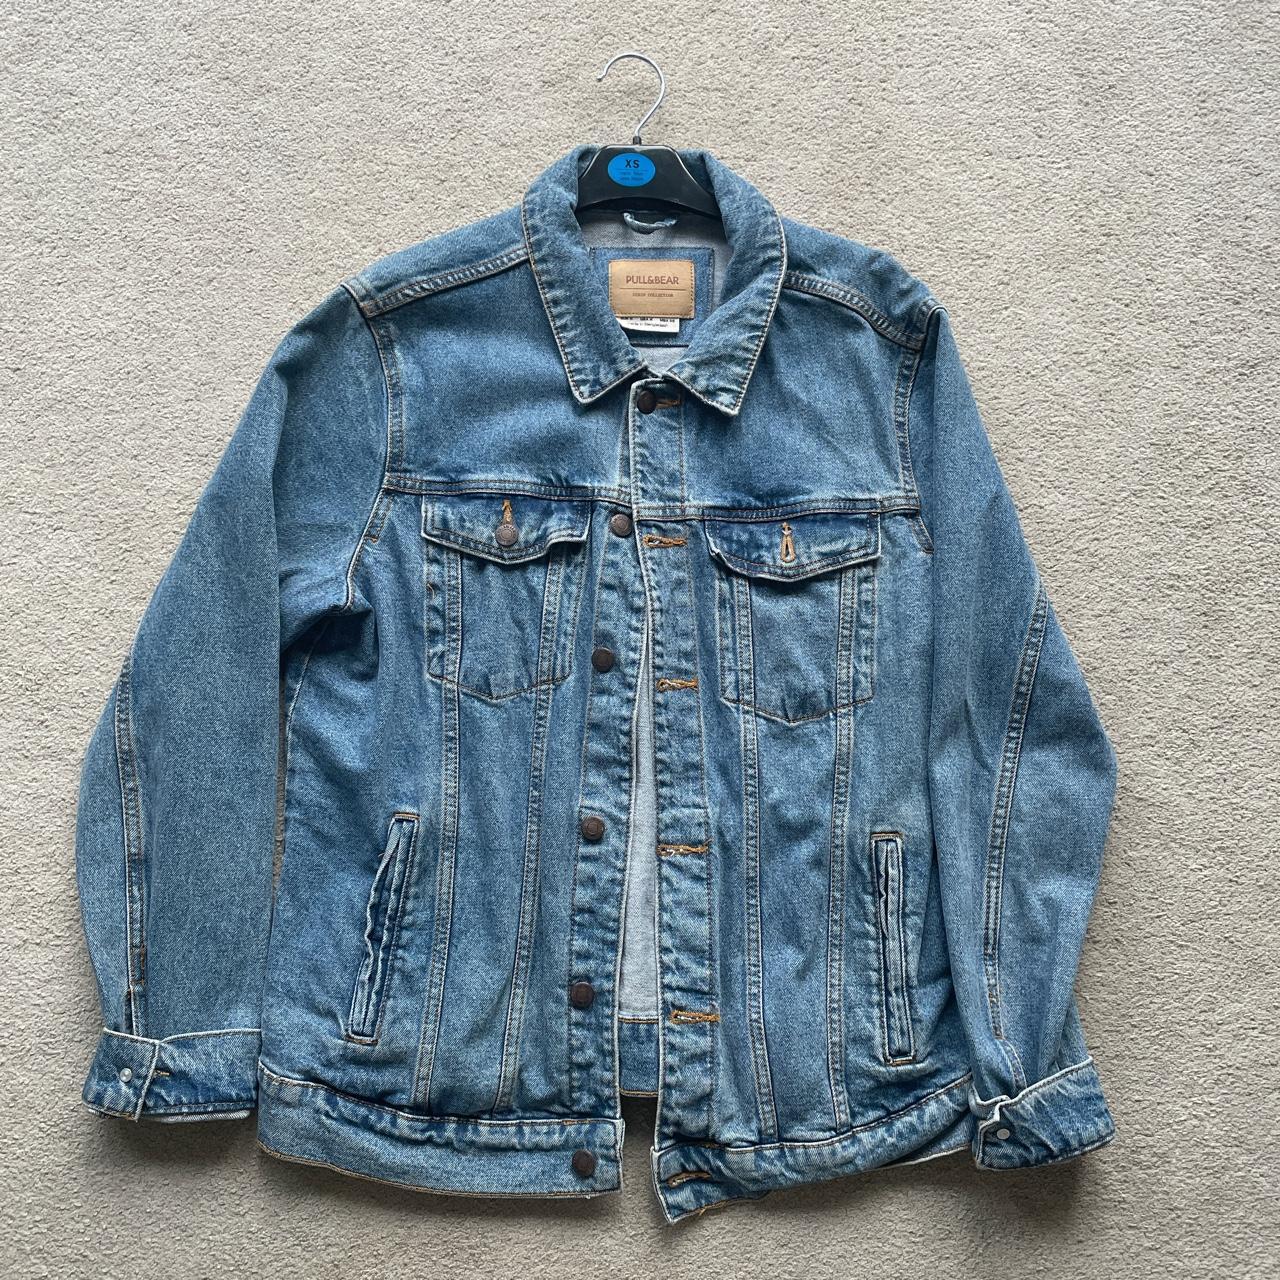 Pull & Bear Denim Jacket Bought 2 years ago, only... - Depop